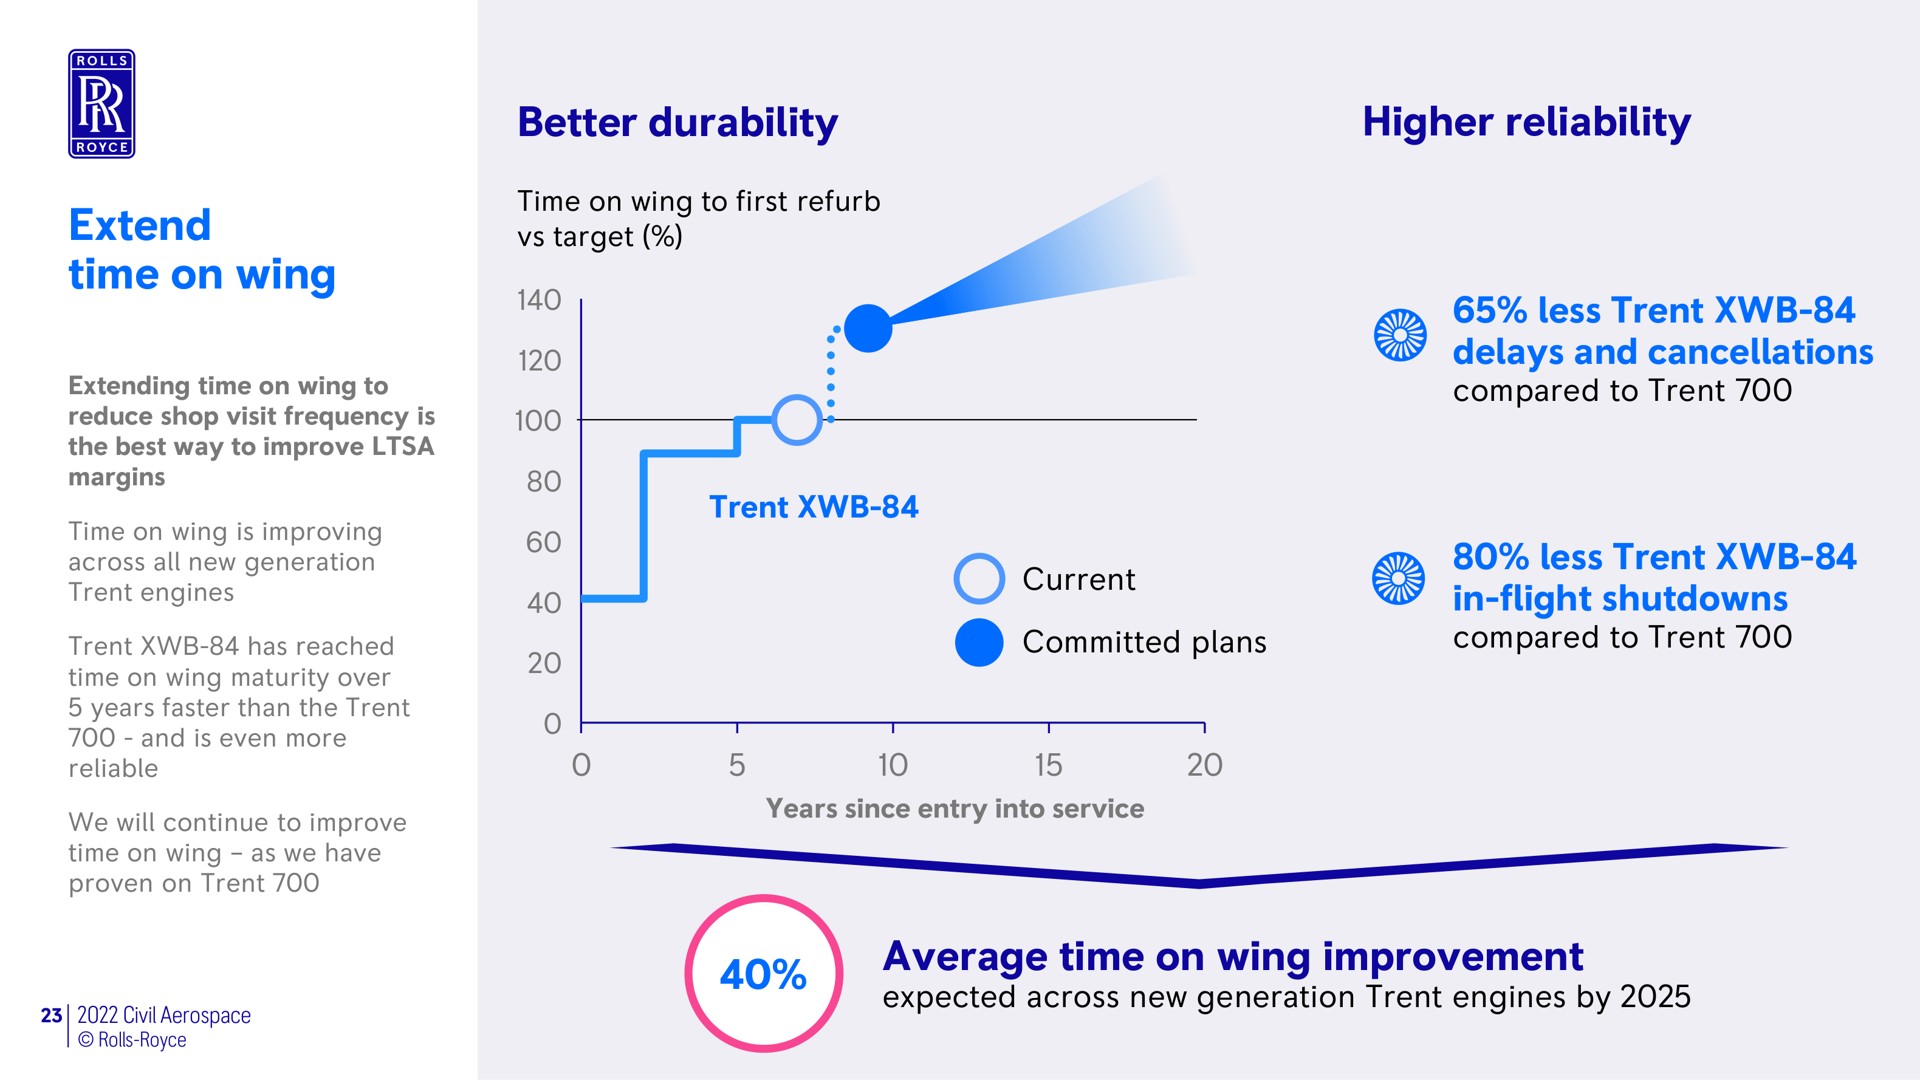 extend time on wing better durability higher reliability less delays and cancellations less in flight shutdowns average time on wing improvement vent engines | Rolls-Royce Holdings